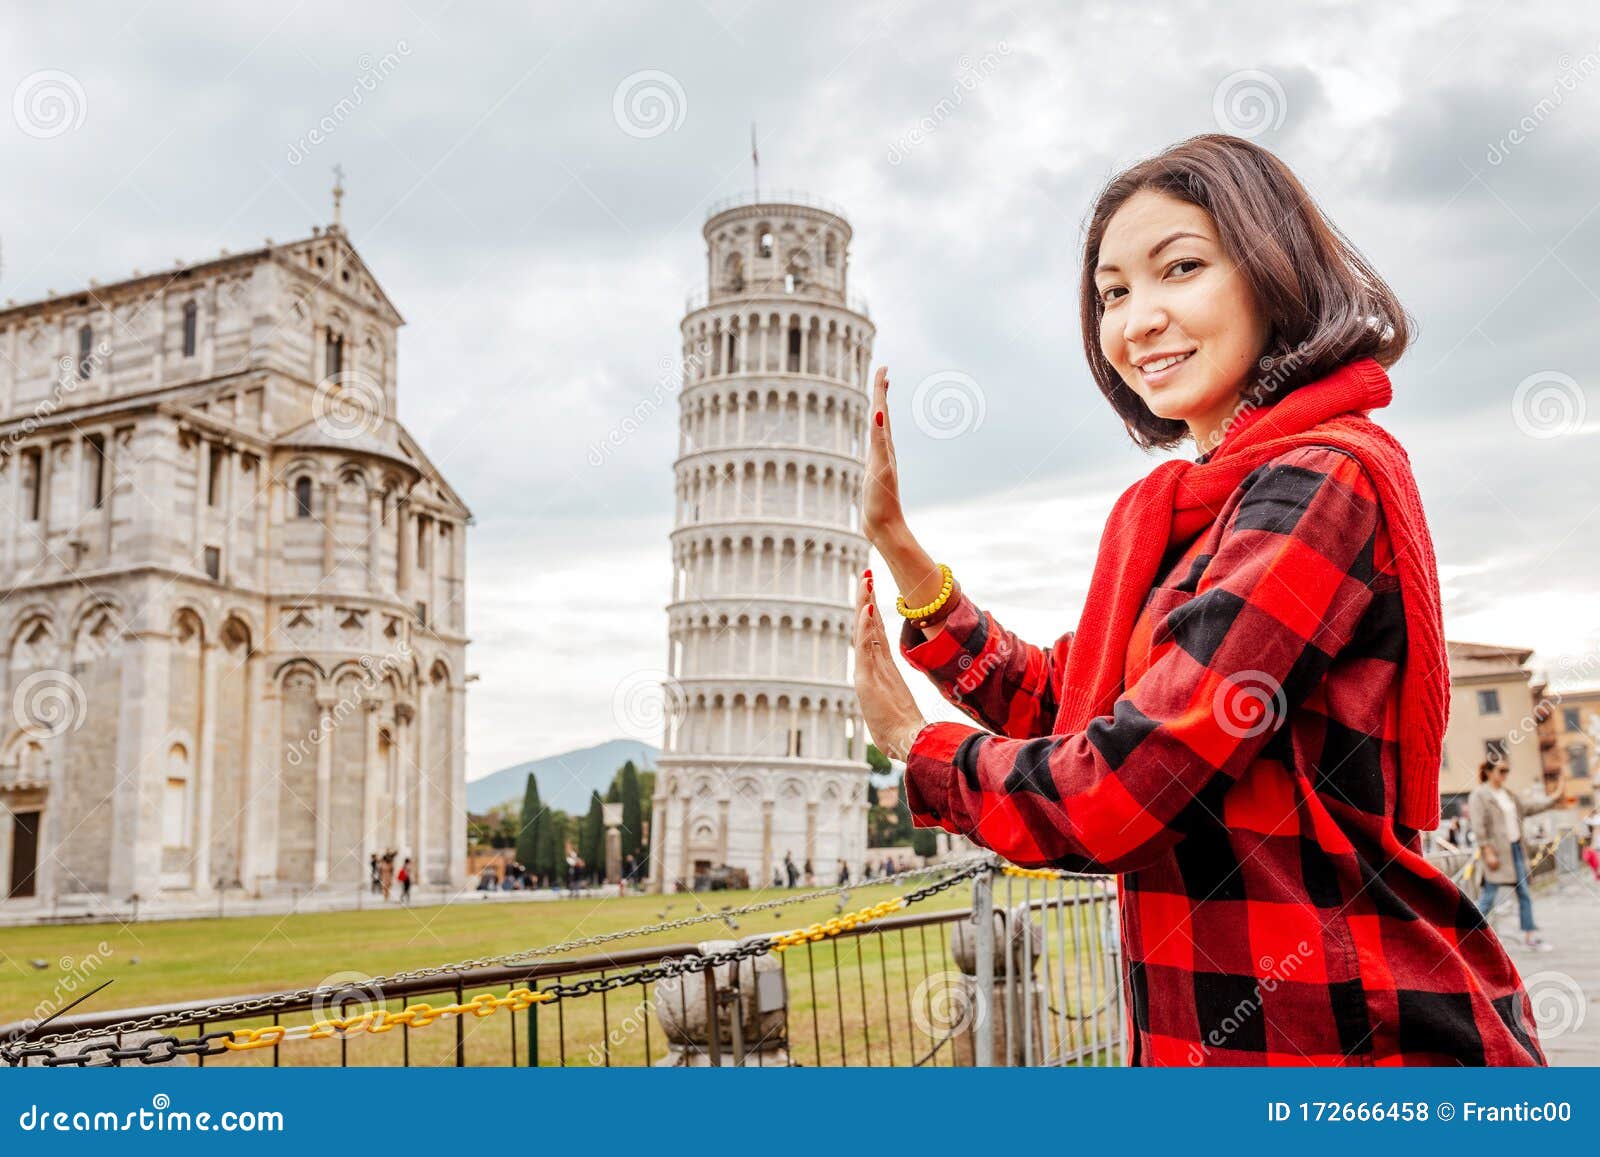 woman traveler making funny poses in front of the famous leaning tower in pisa, italy. happy travel photos in italy concept